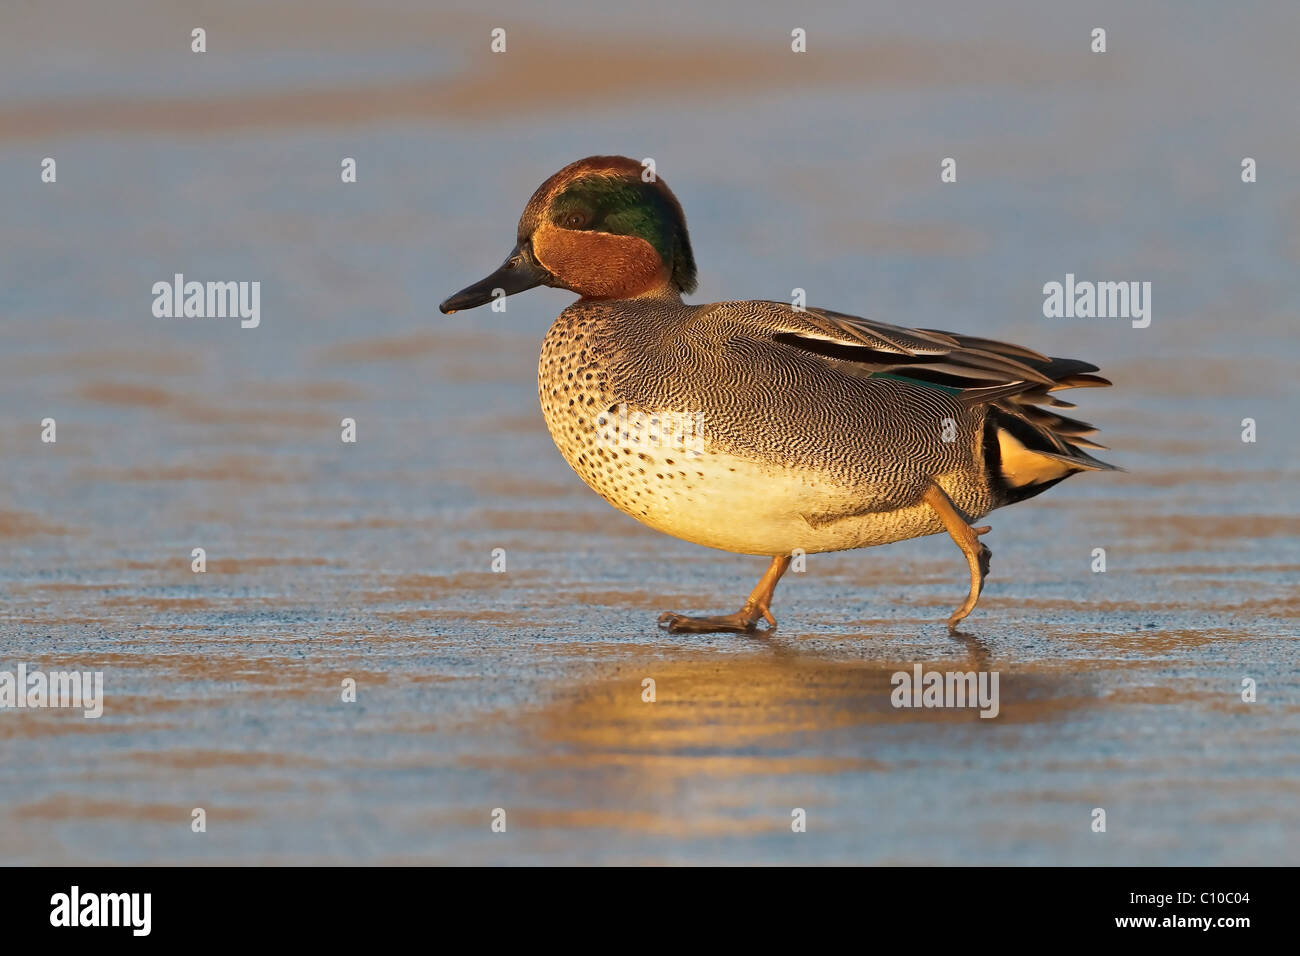 Drake Teal walking across an ice covered pool Stock Photo